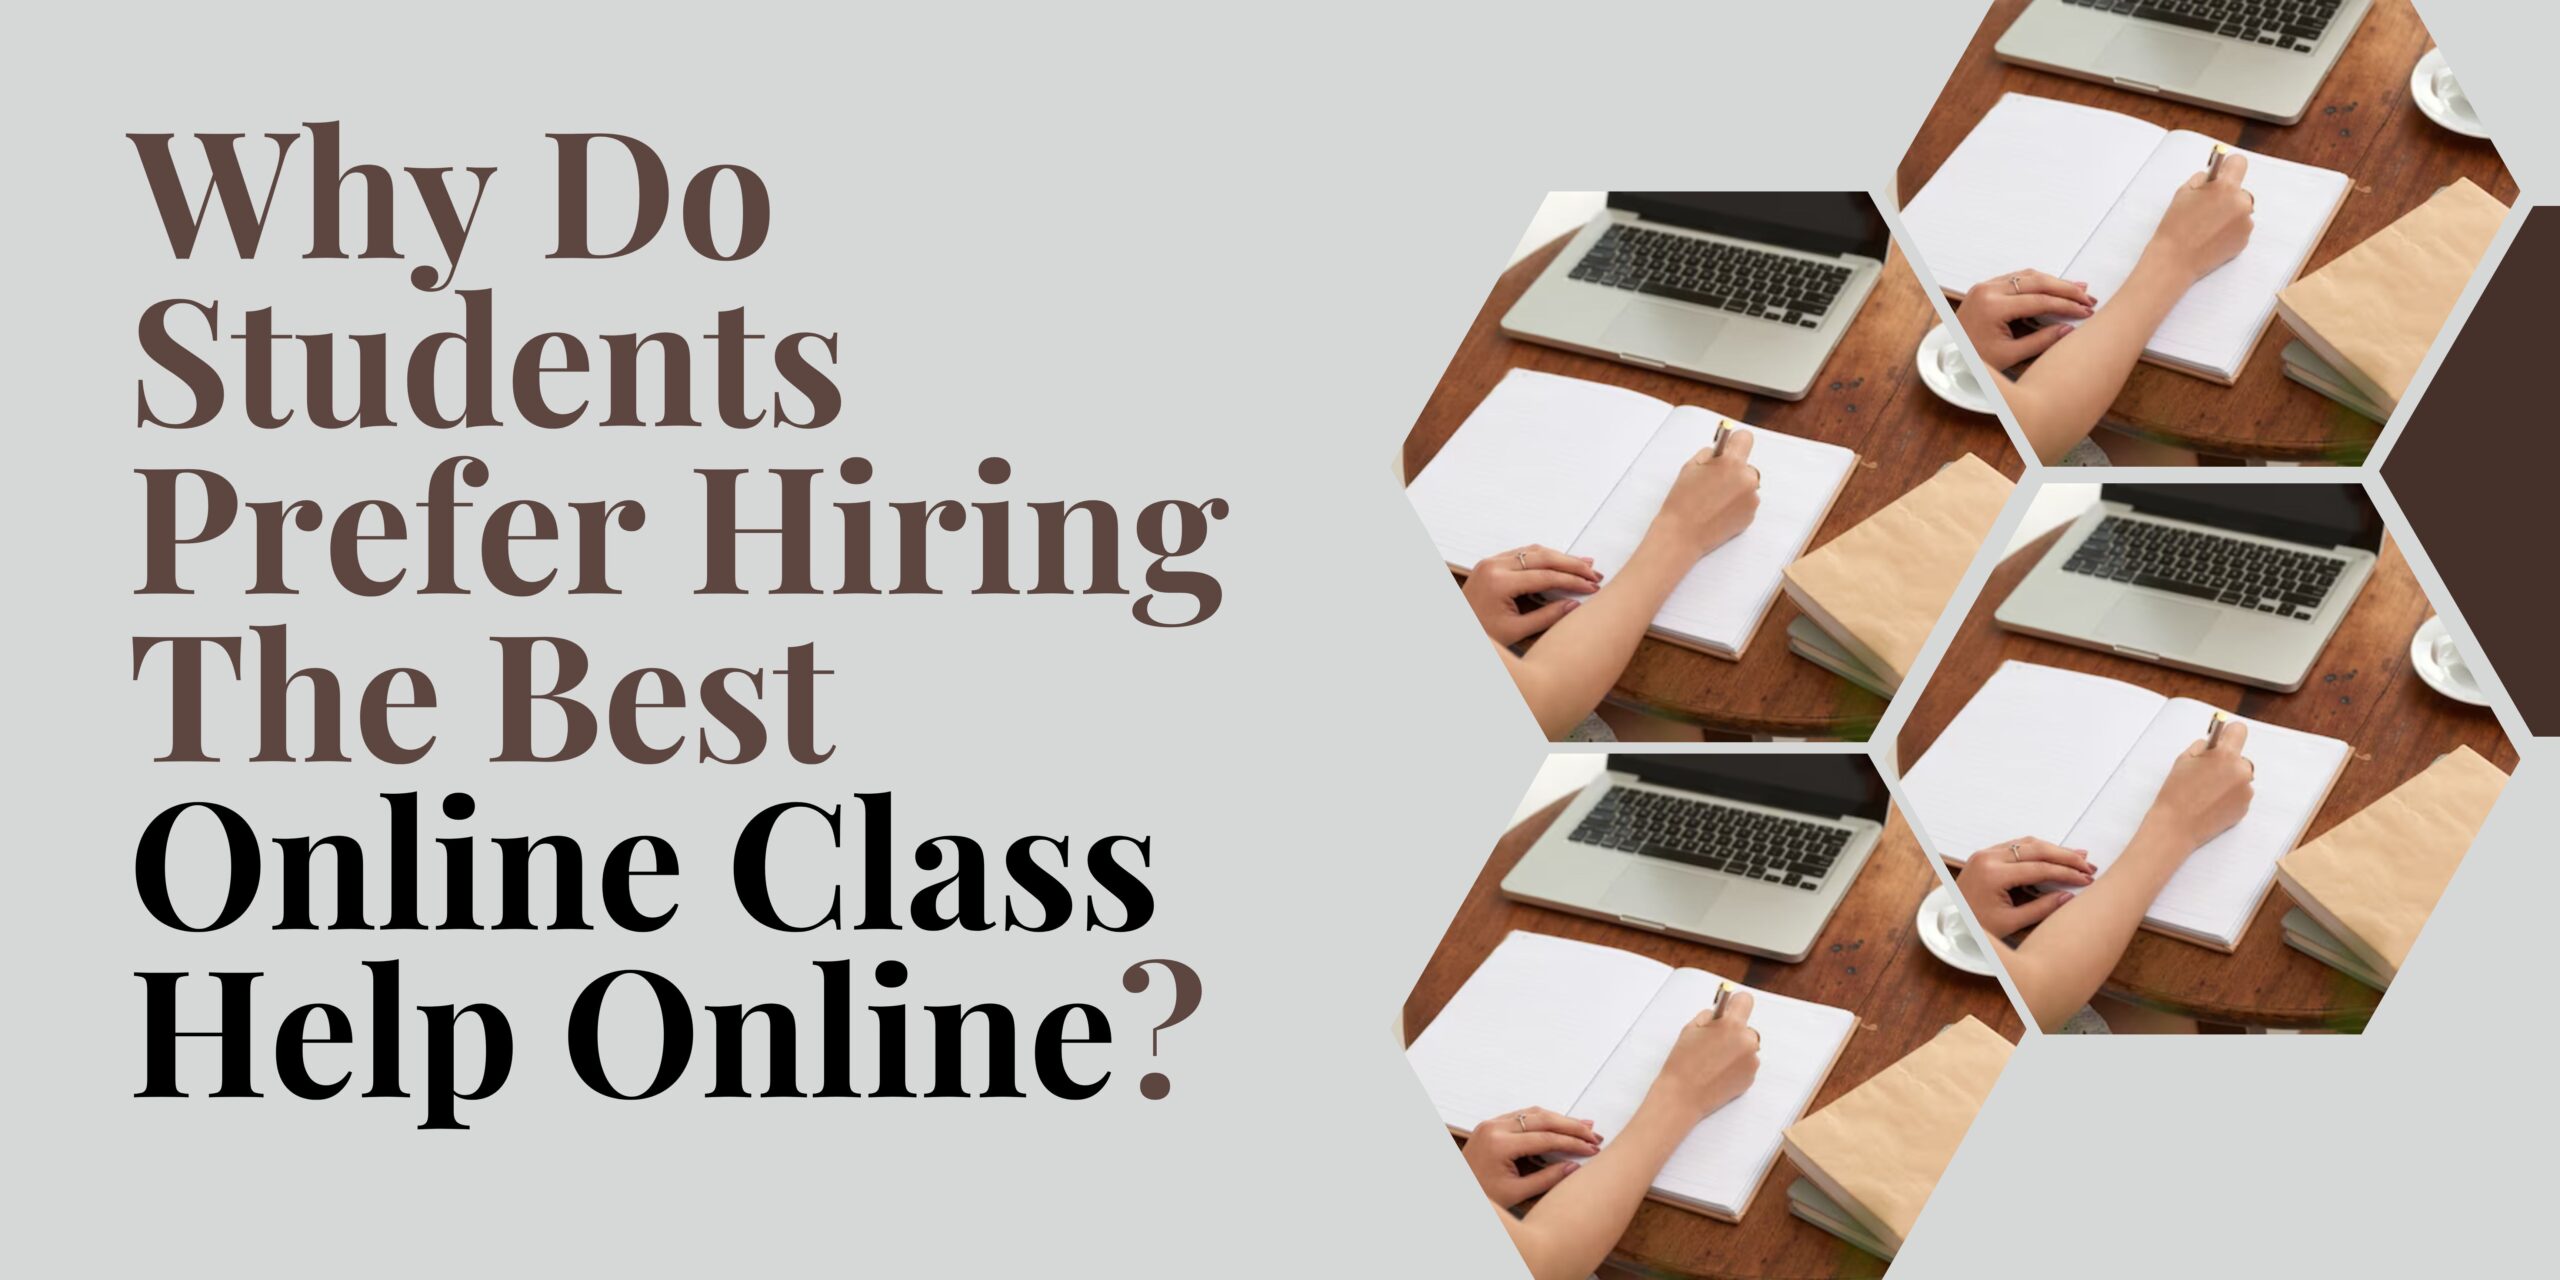 Why Do Students Prefer Hiring The Best Online Class Help Online